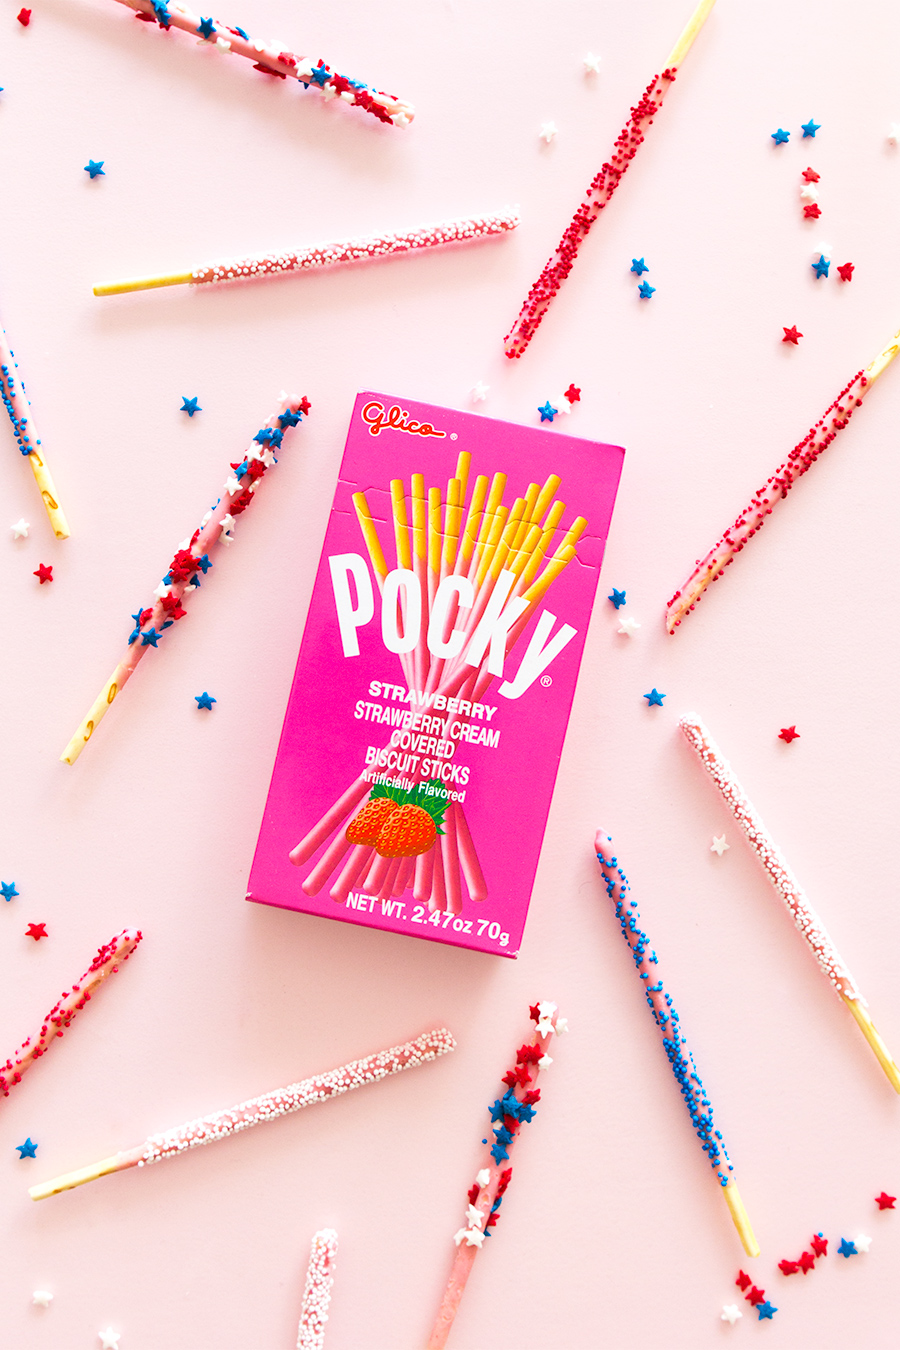 Pocky Wallpapers